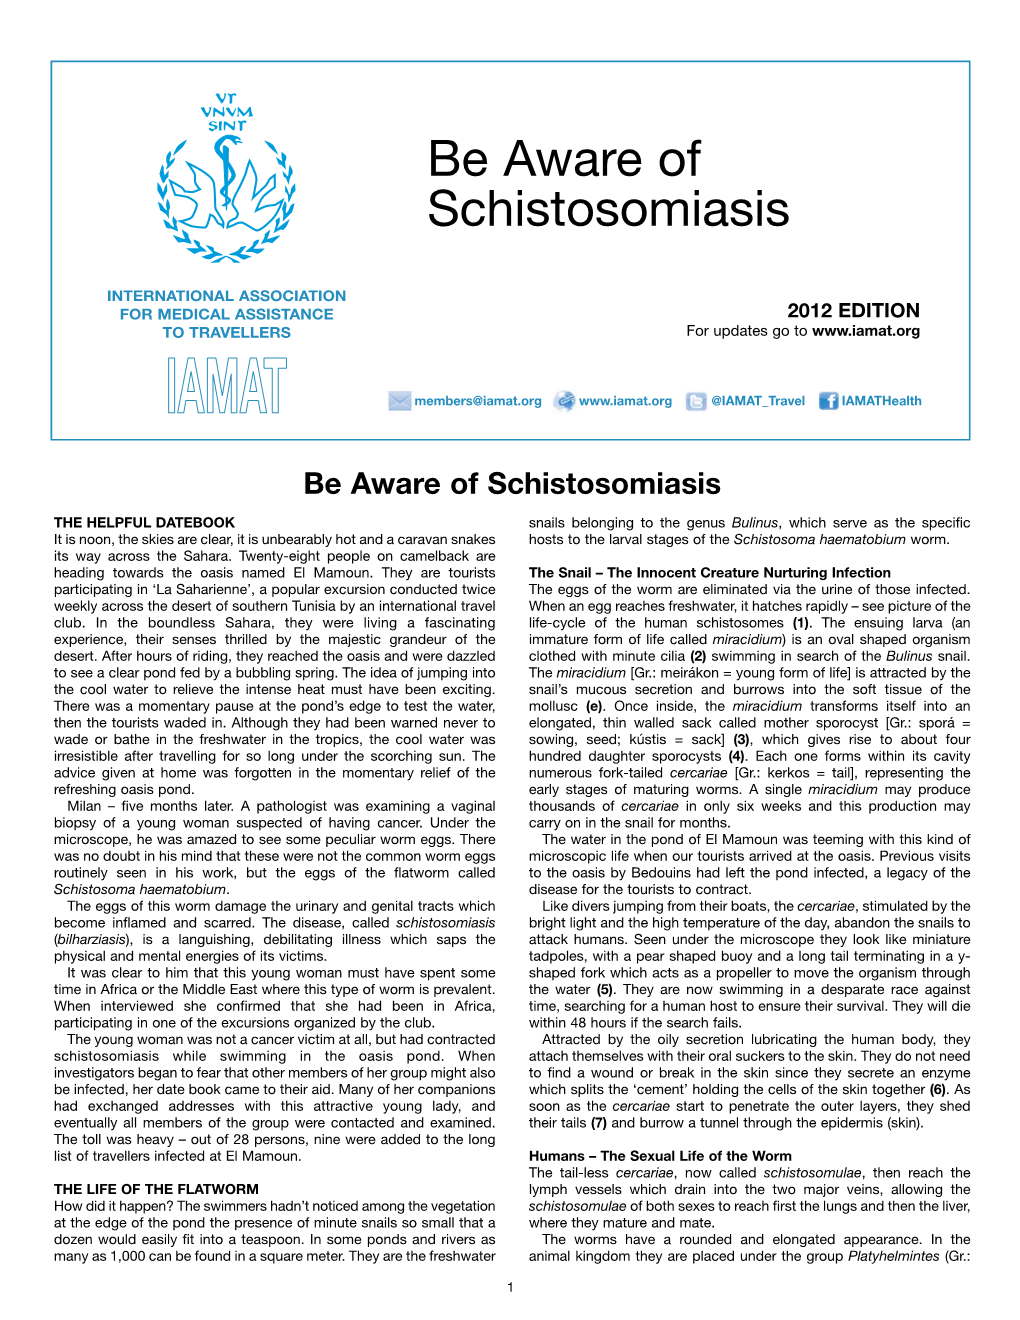 Be Aware of Schistosomiasis